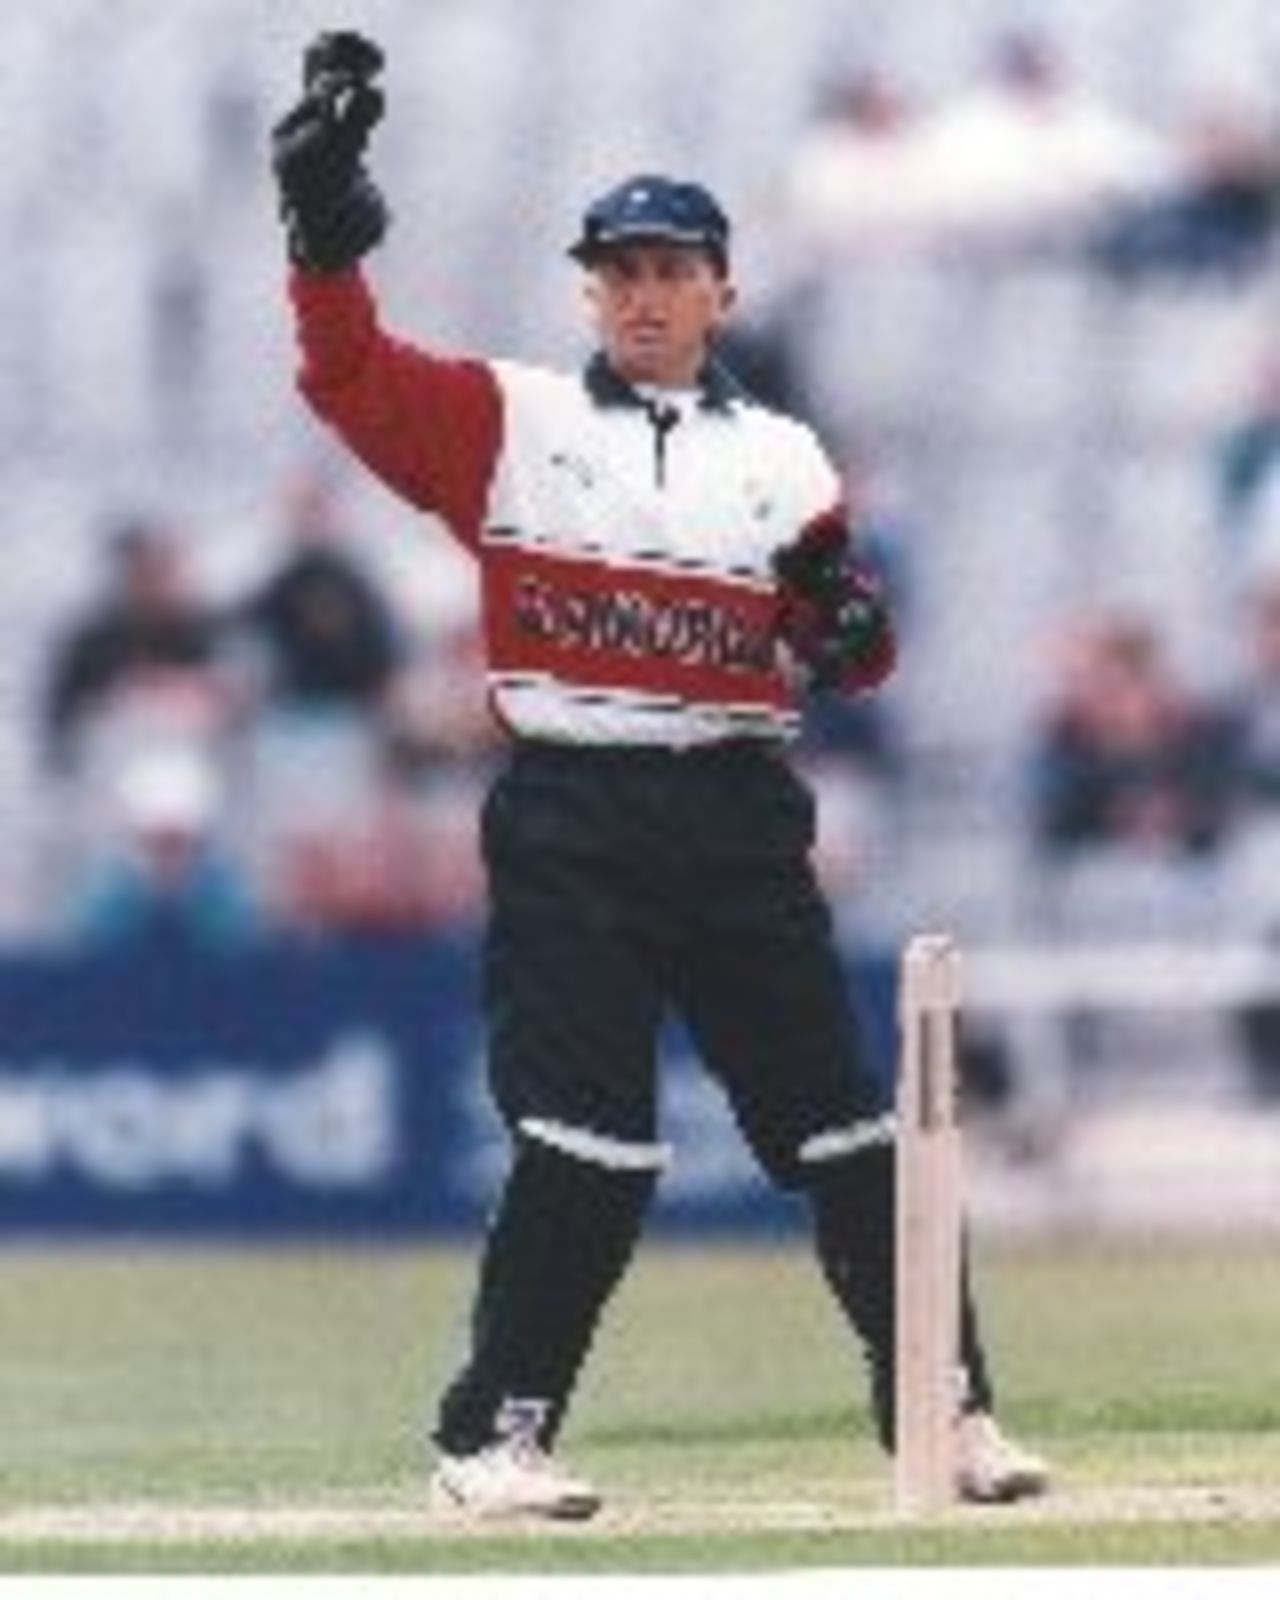 Colin Metson keeping wicket in Glamorgan's Sunday League fixture with Yorkshire at Headingley in May 1995